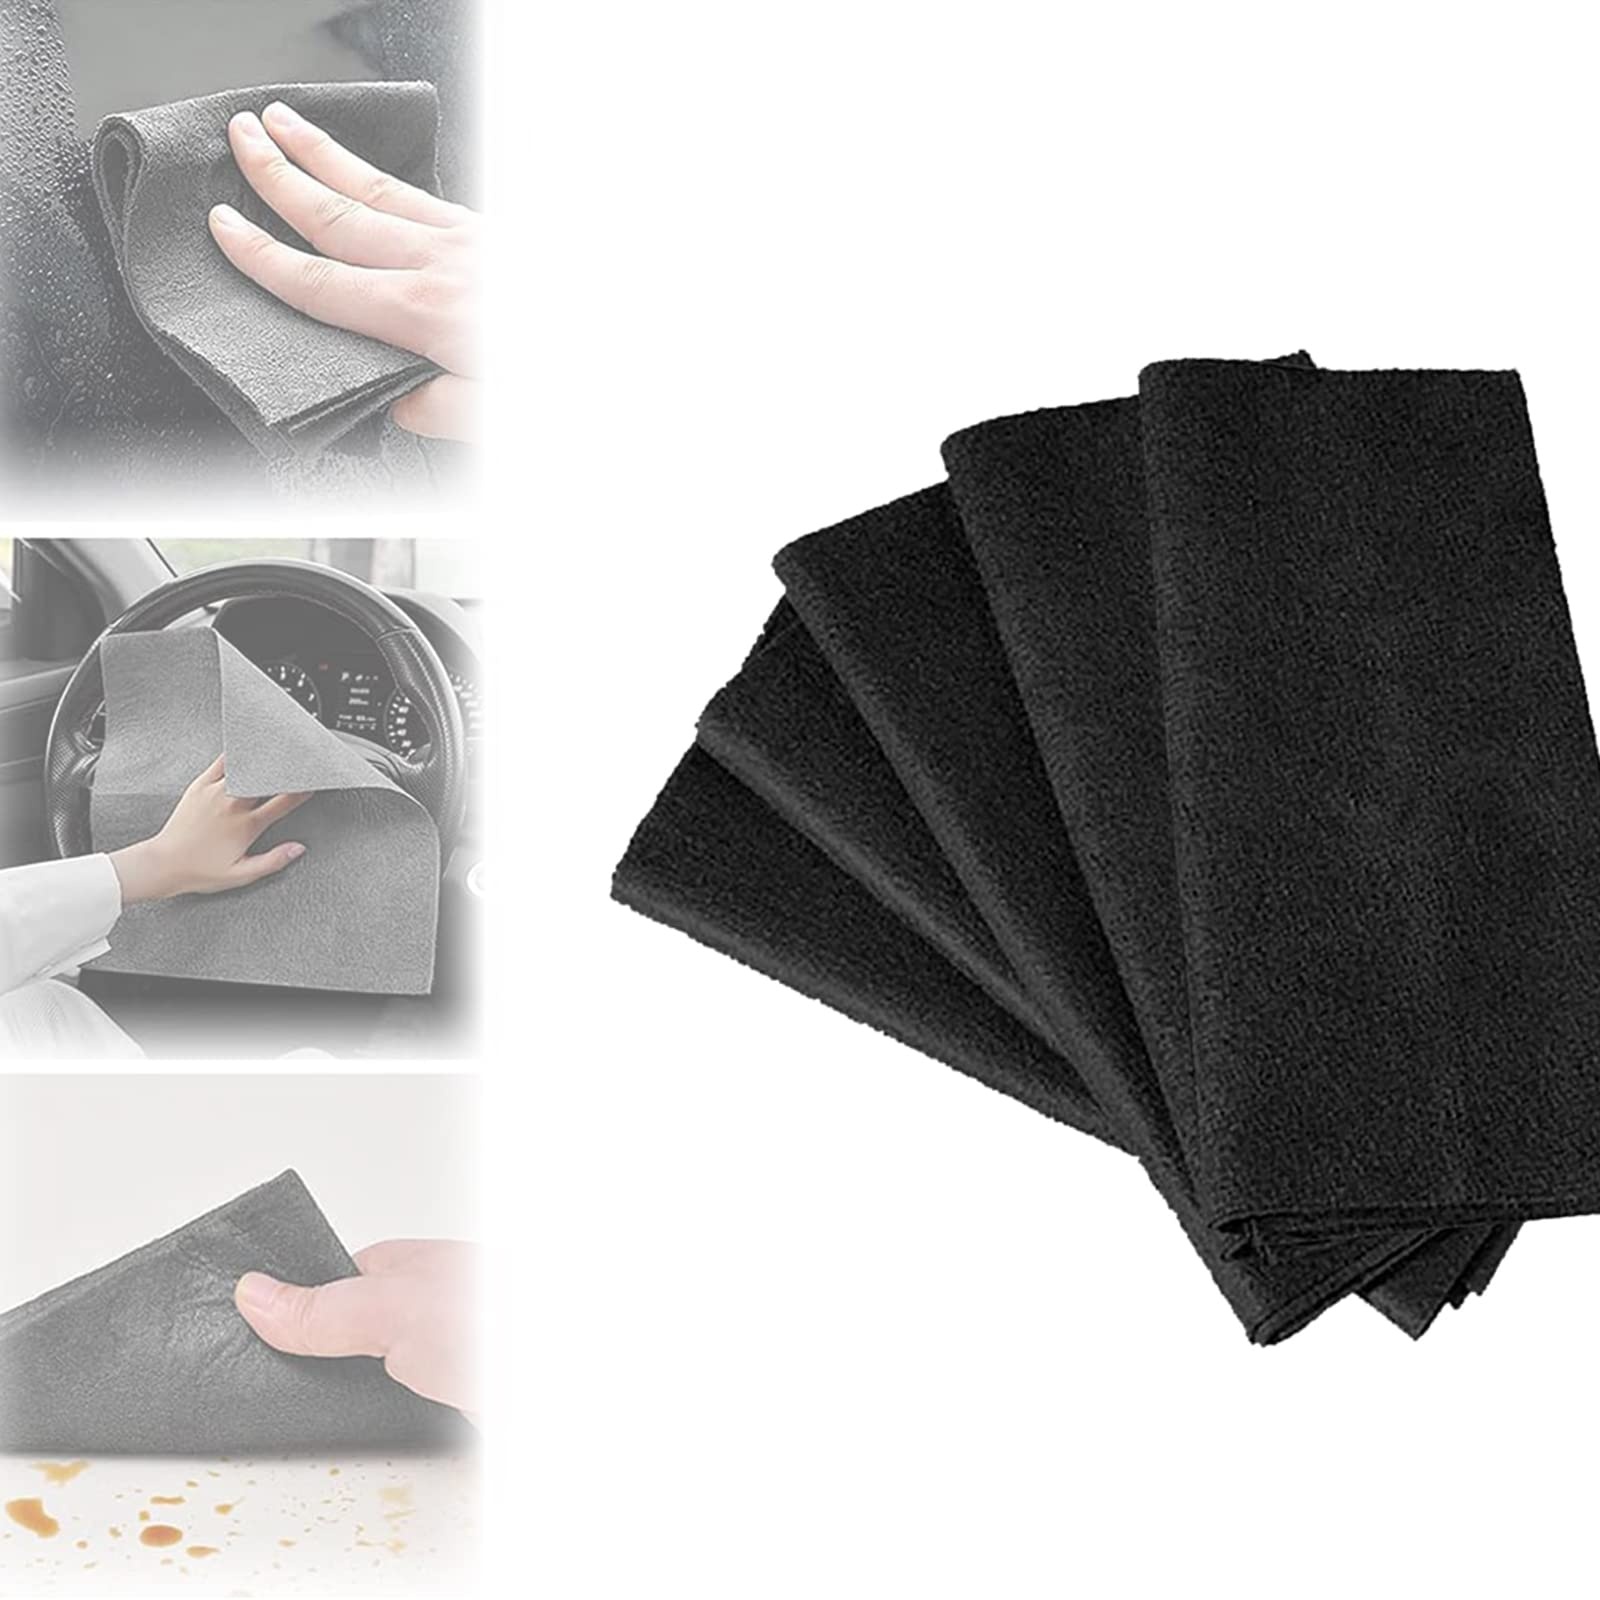 Thickened Magic Cleaning Cloth,Magic Cleaning Cloth,Sonorou Cleaning Cloth,Streak Free Reusable Microfiber Cleaning Rags,for Glass Windows Cleaning (5 pcs-Black,11.81 * 11.81 Inch)